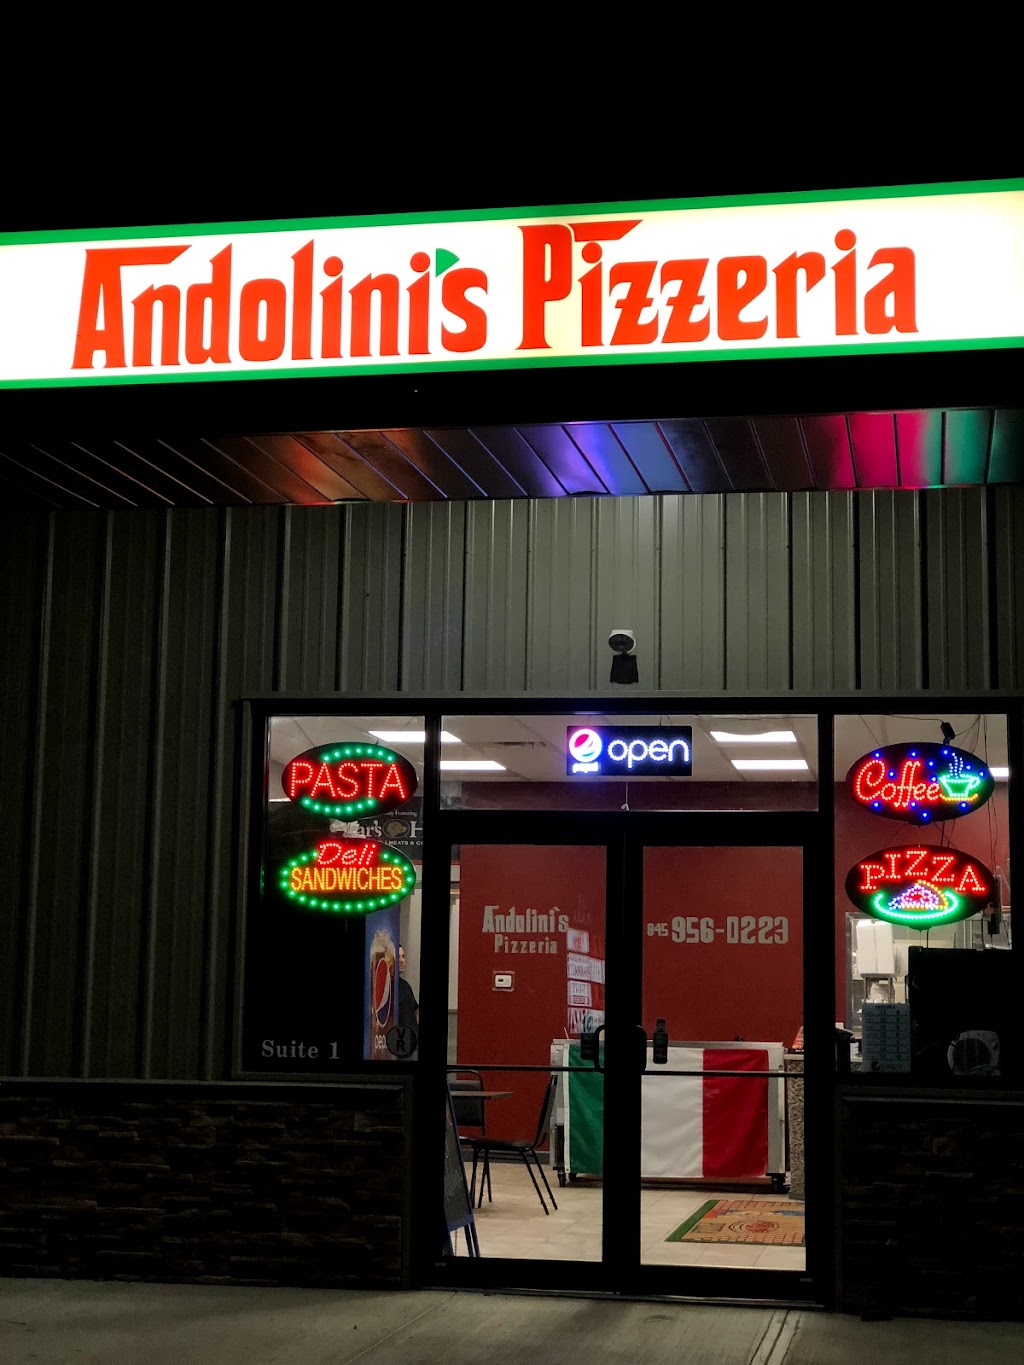 Andolini’s Pizzeria | 1291 Dolsontown Rd #1, Middletown, NY 10940 | Phone: (845) 956-0223